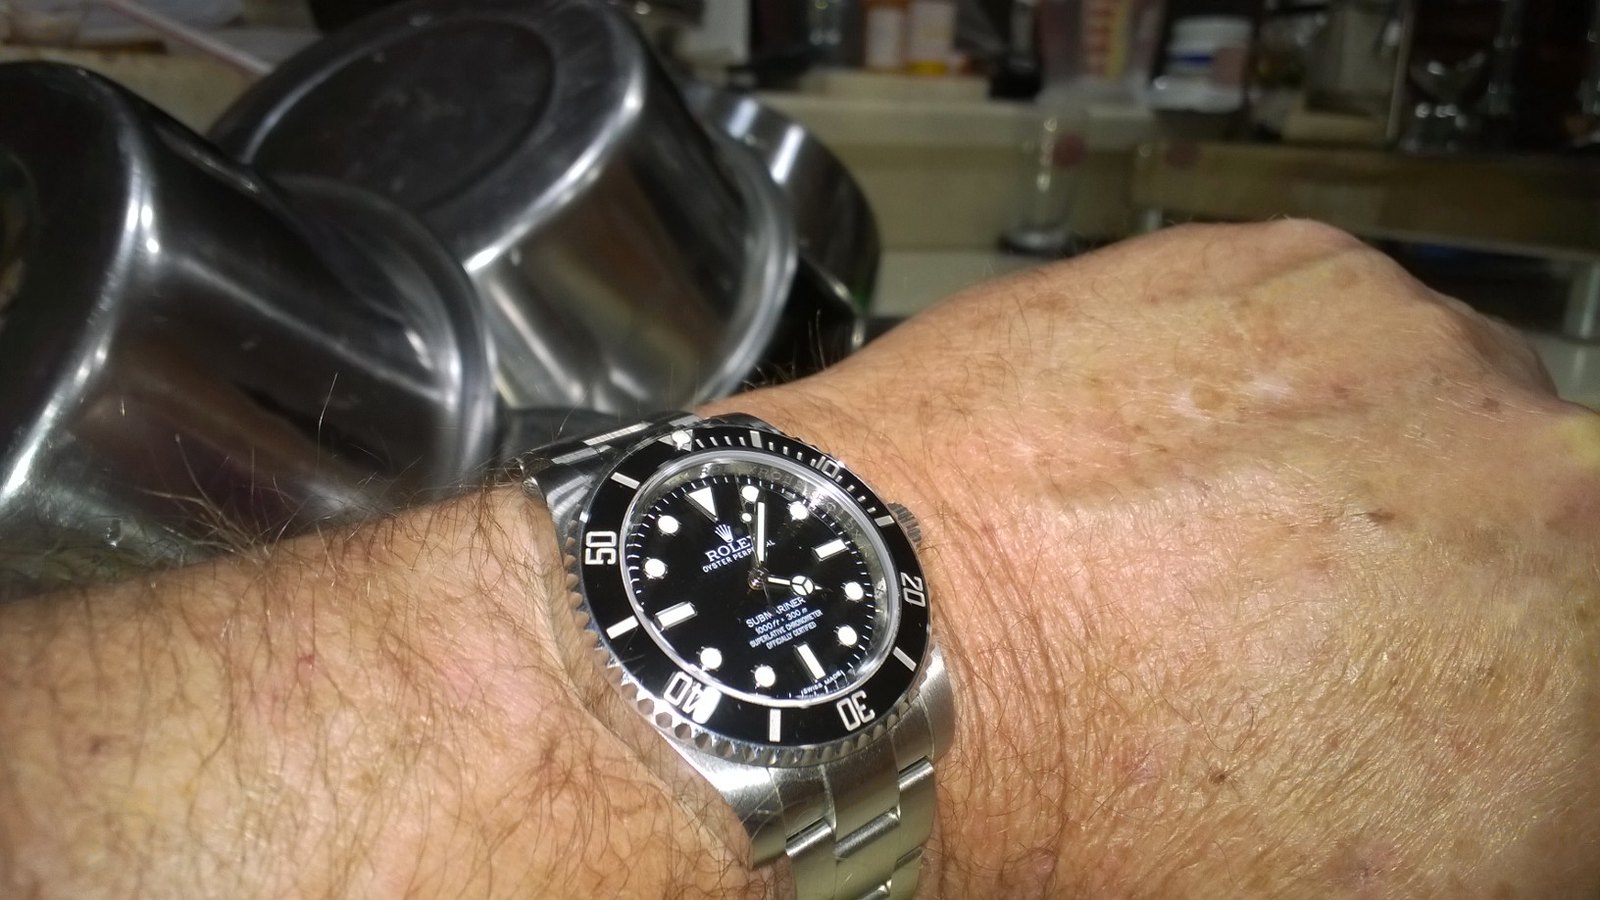 Is the Seiko 8L35 movement worth the money? | WatchUSeek Watch Forums